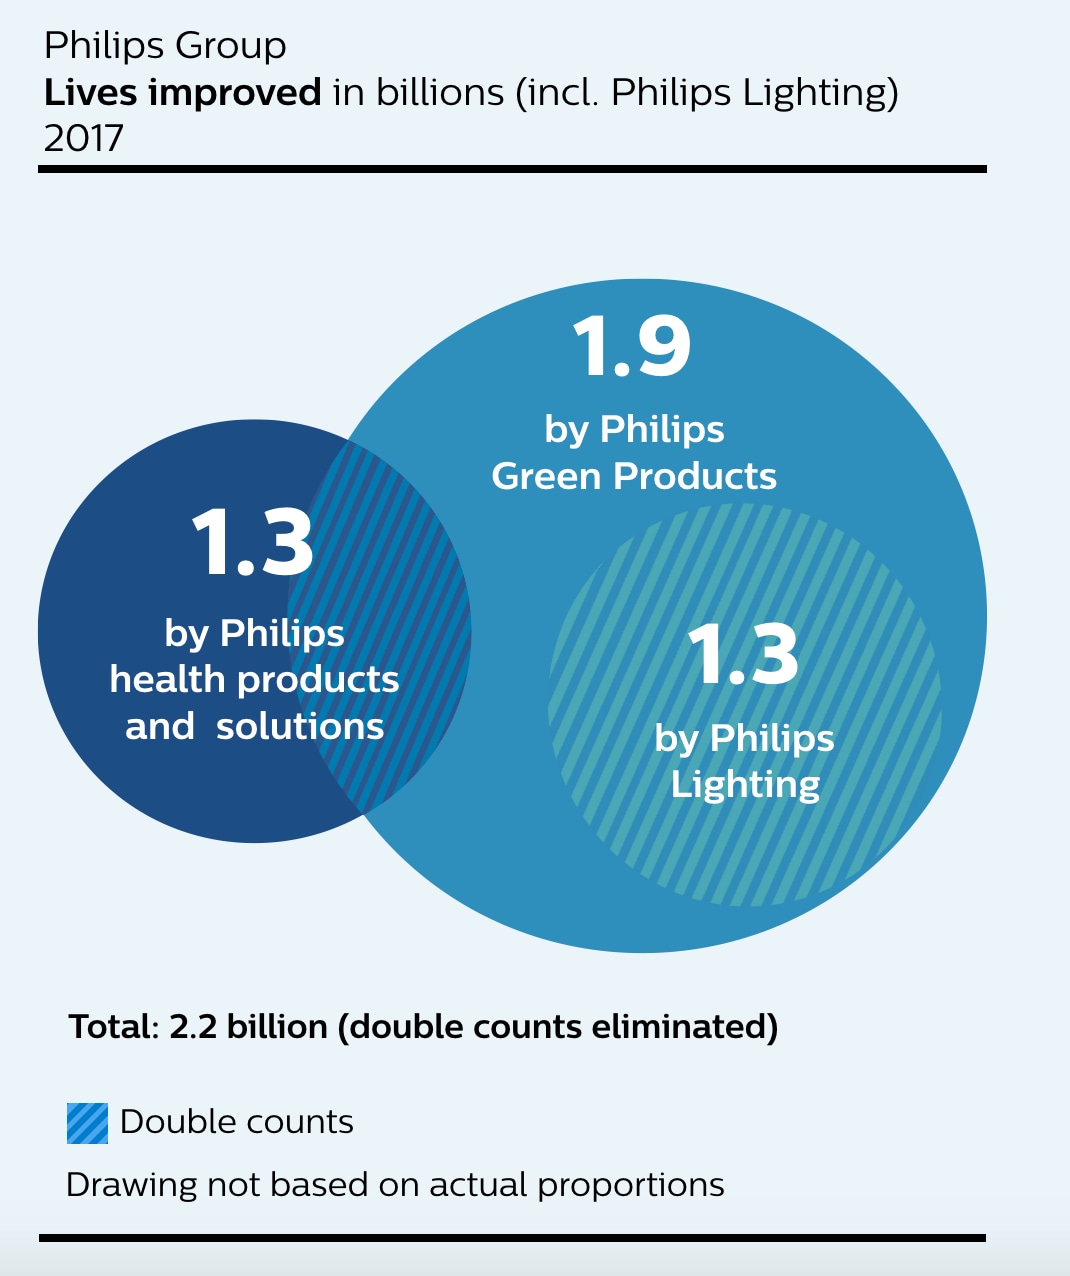 Lives improved by Philips in 2017